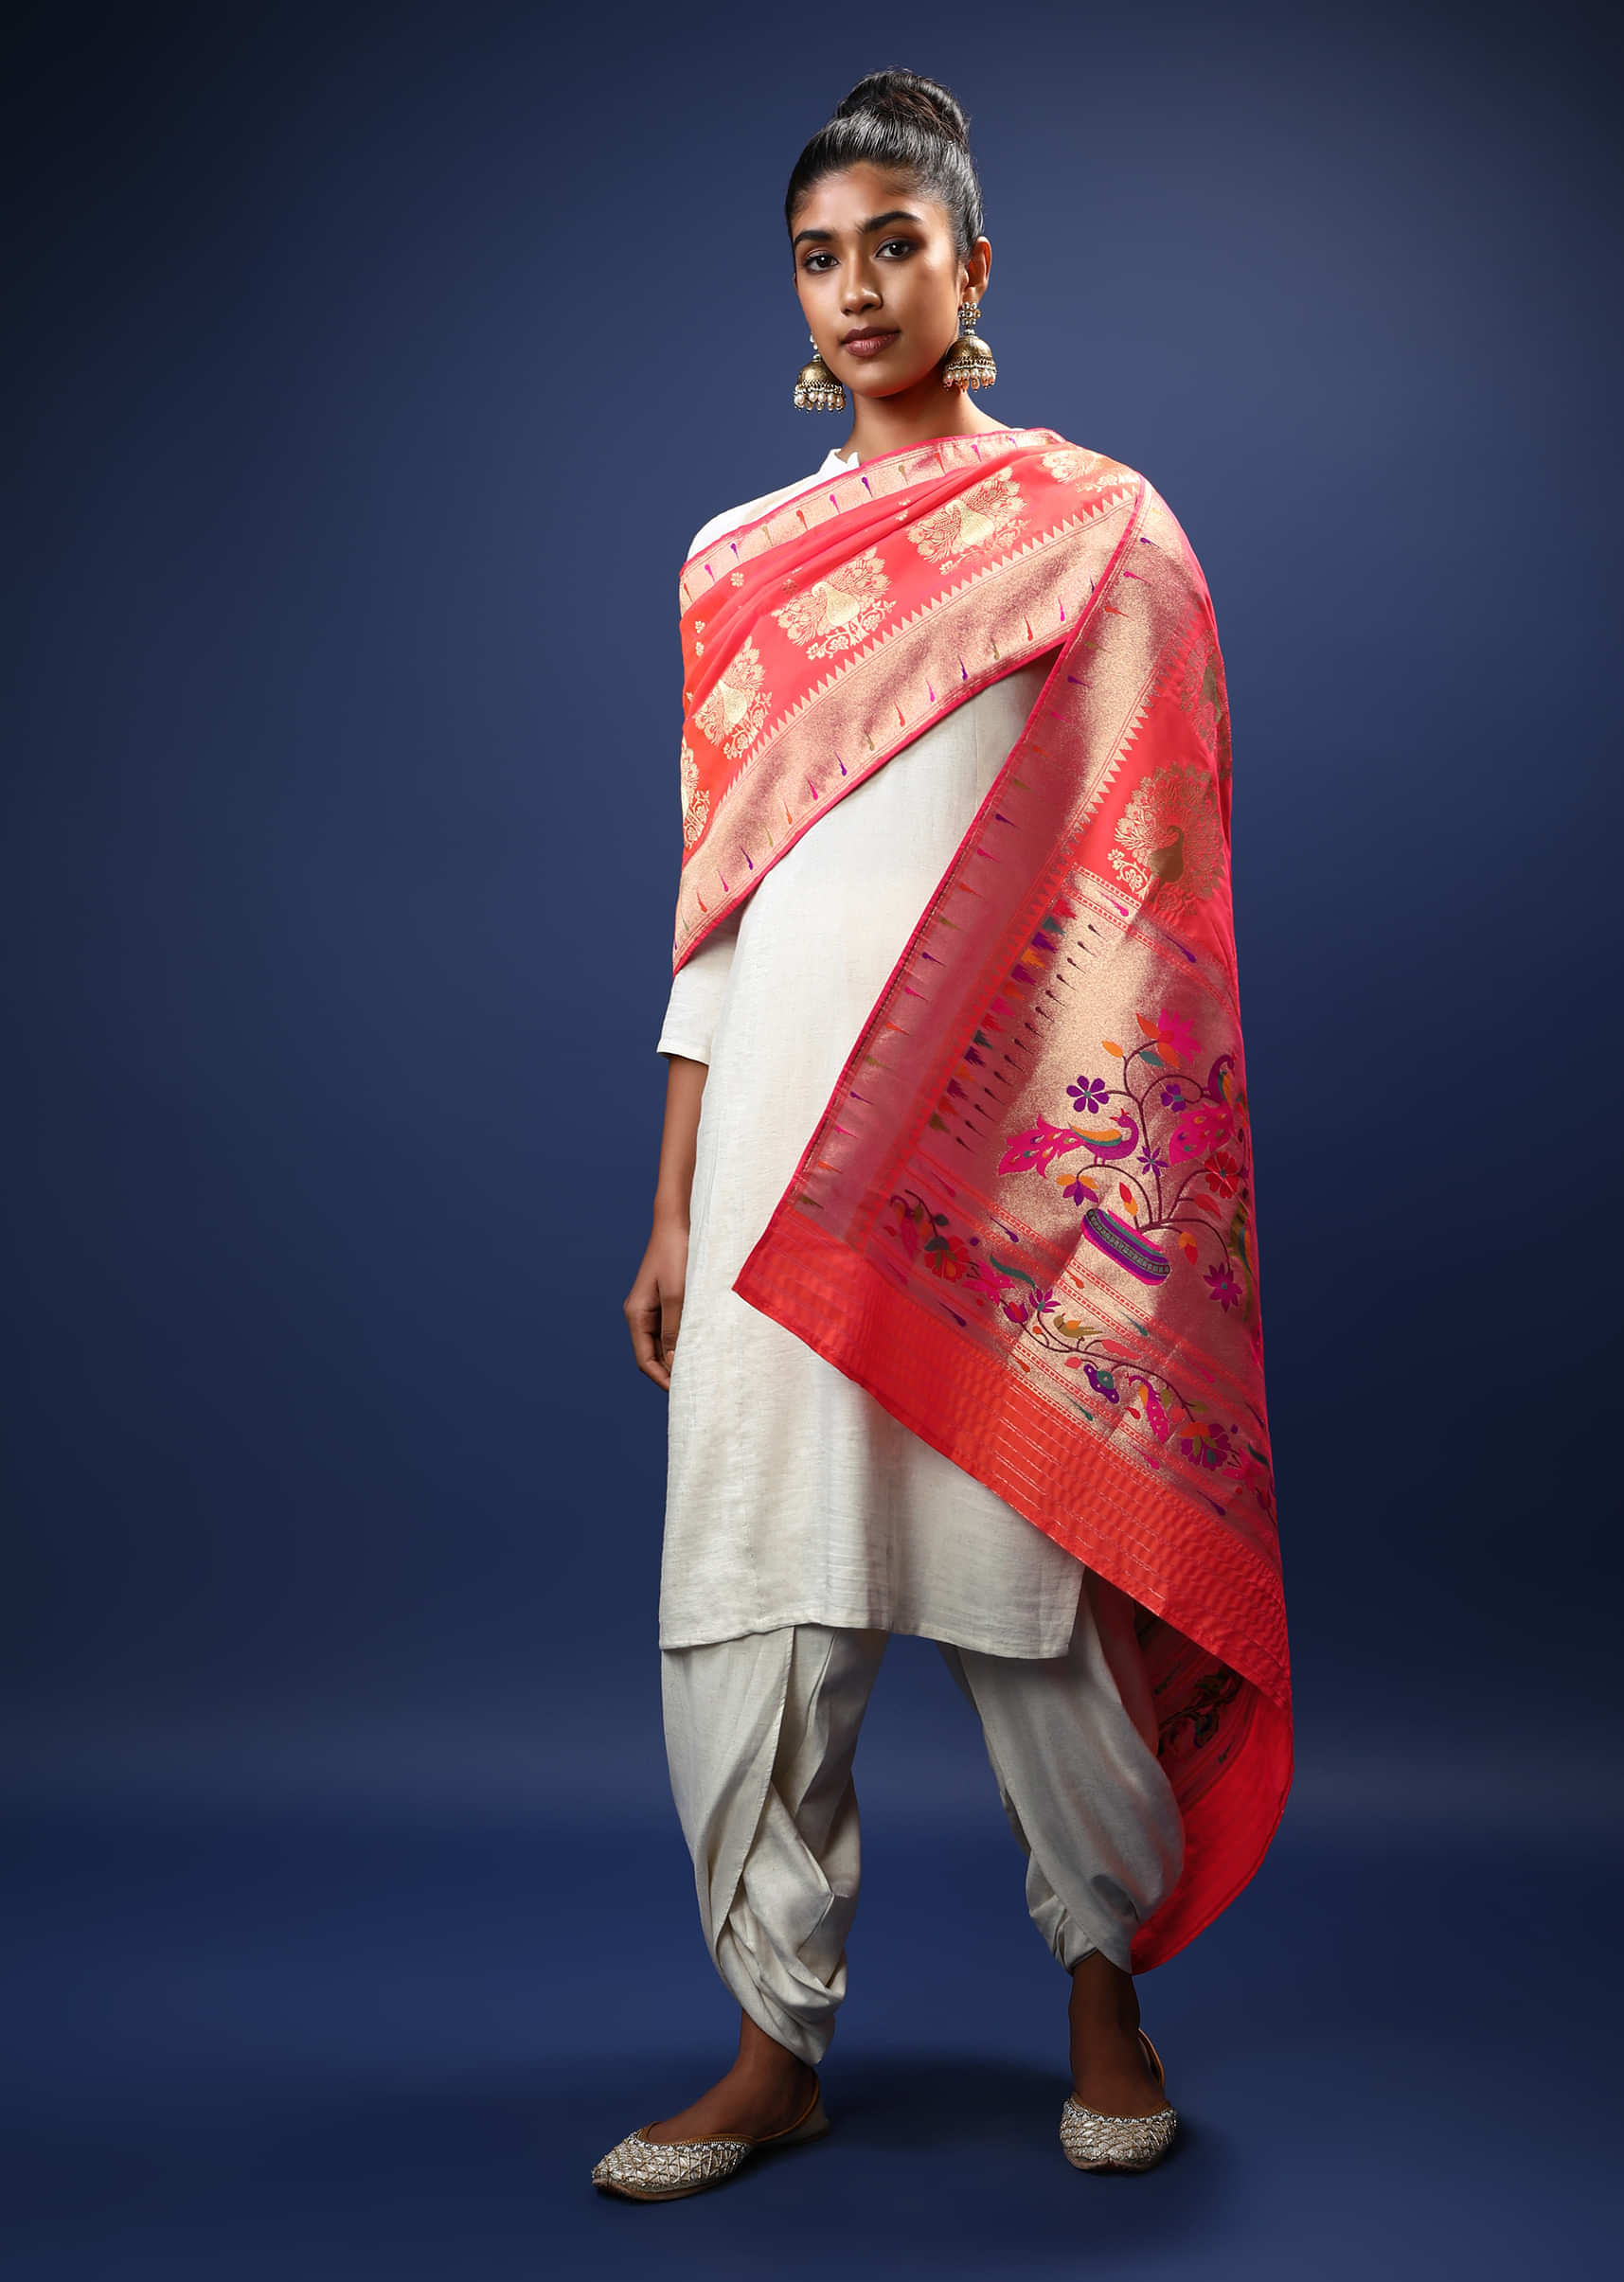 Coral Pink Dupatta In Brocade Silk With Multi Colored Bird Design On The Border And Golden Peacock Motifs Online - Kalki Fashion